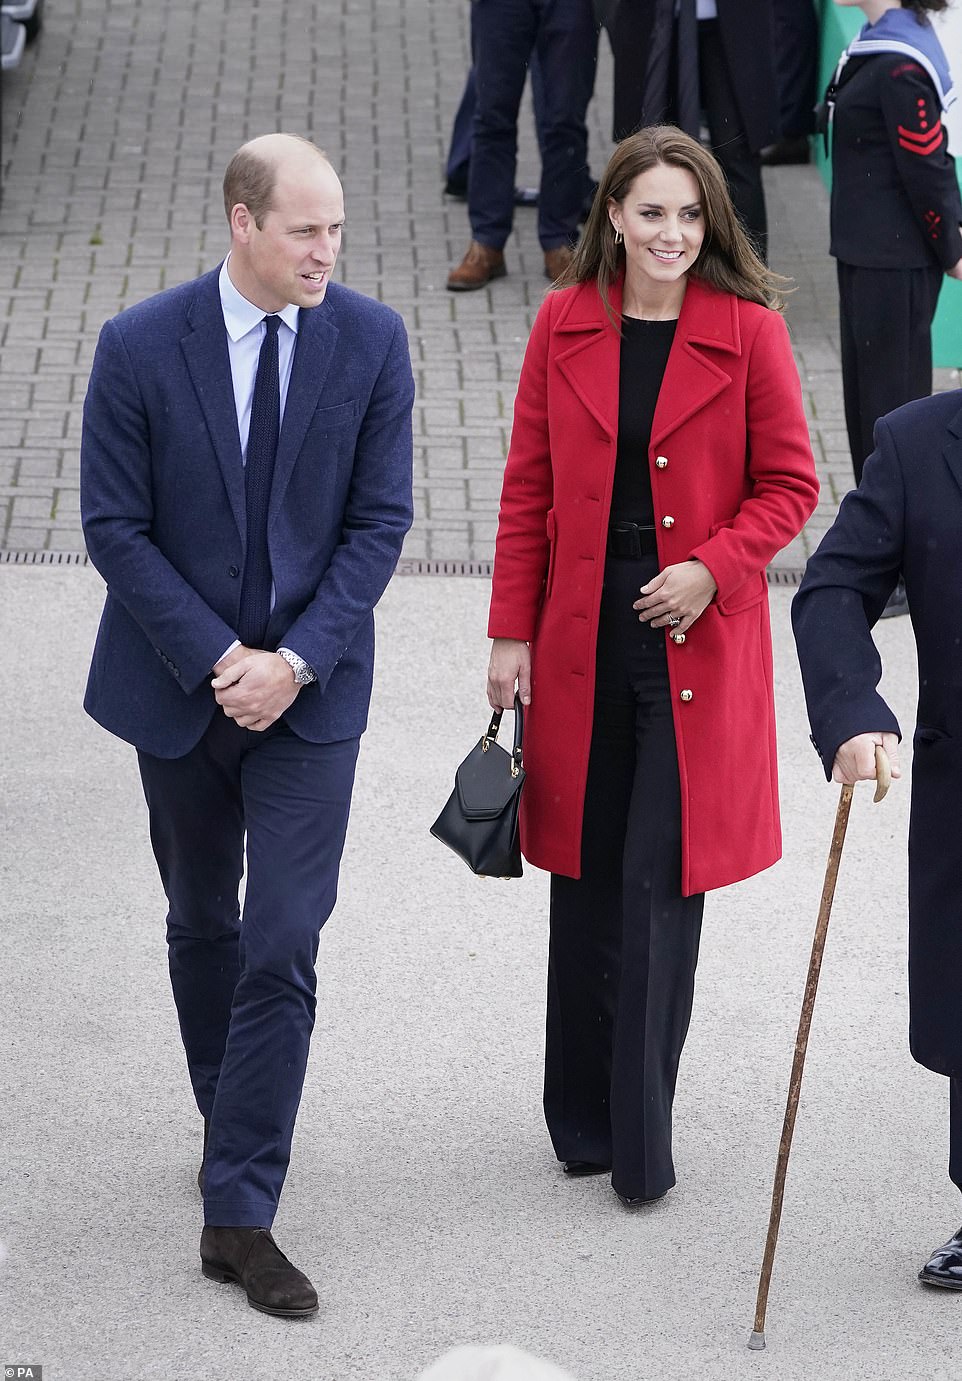 William and Kate are travelling the length of Wales today, first visiting Holyhead in Anglesey in the north, and then travelling to Swansea in the south-west